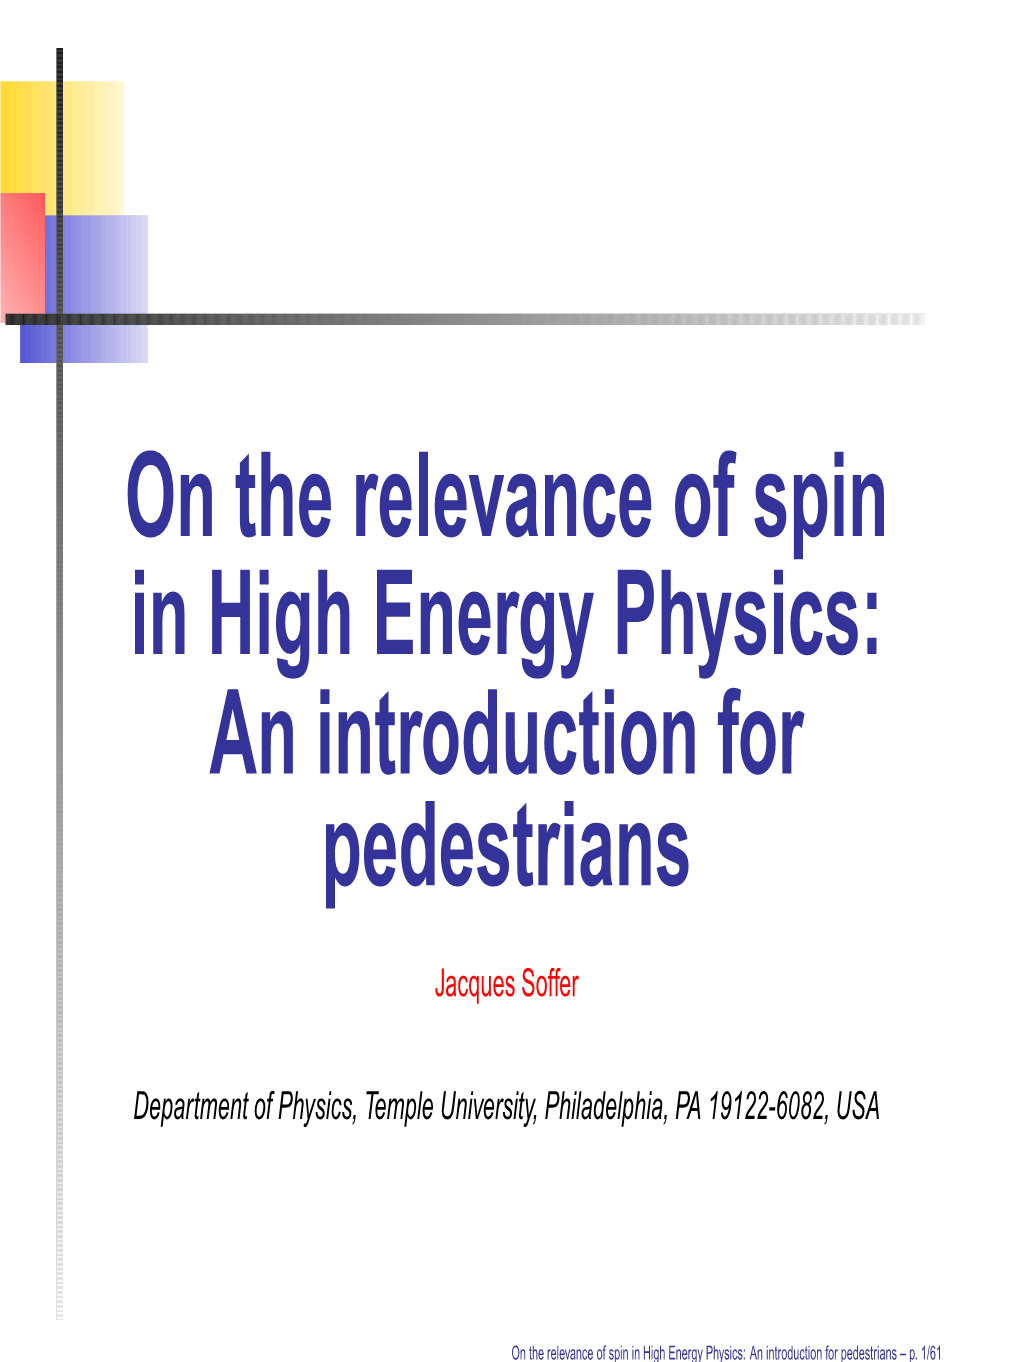 On the Relevance of Spin in High Energy Physics: an Introduction for Pedestrians